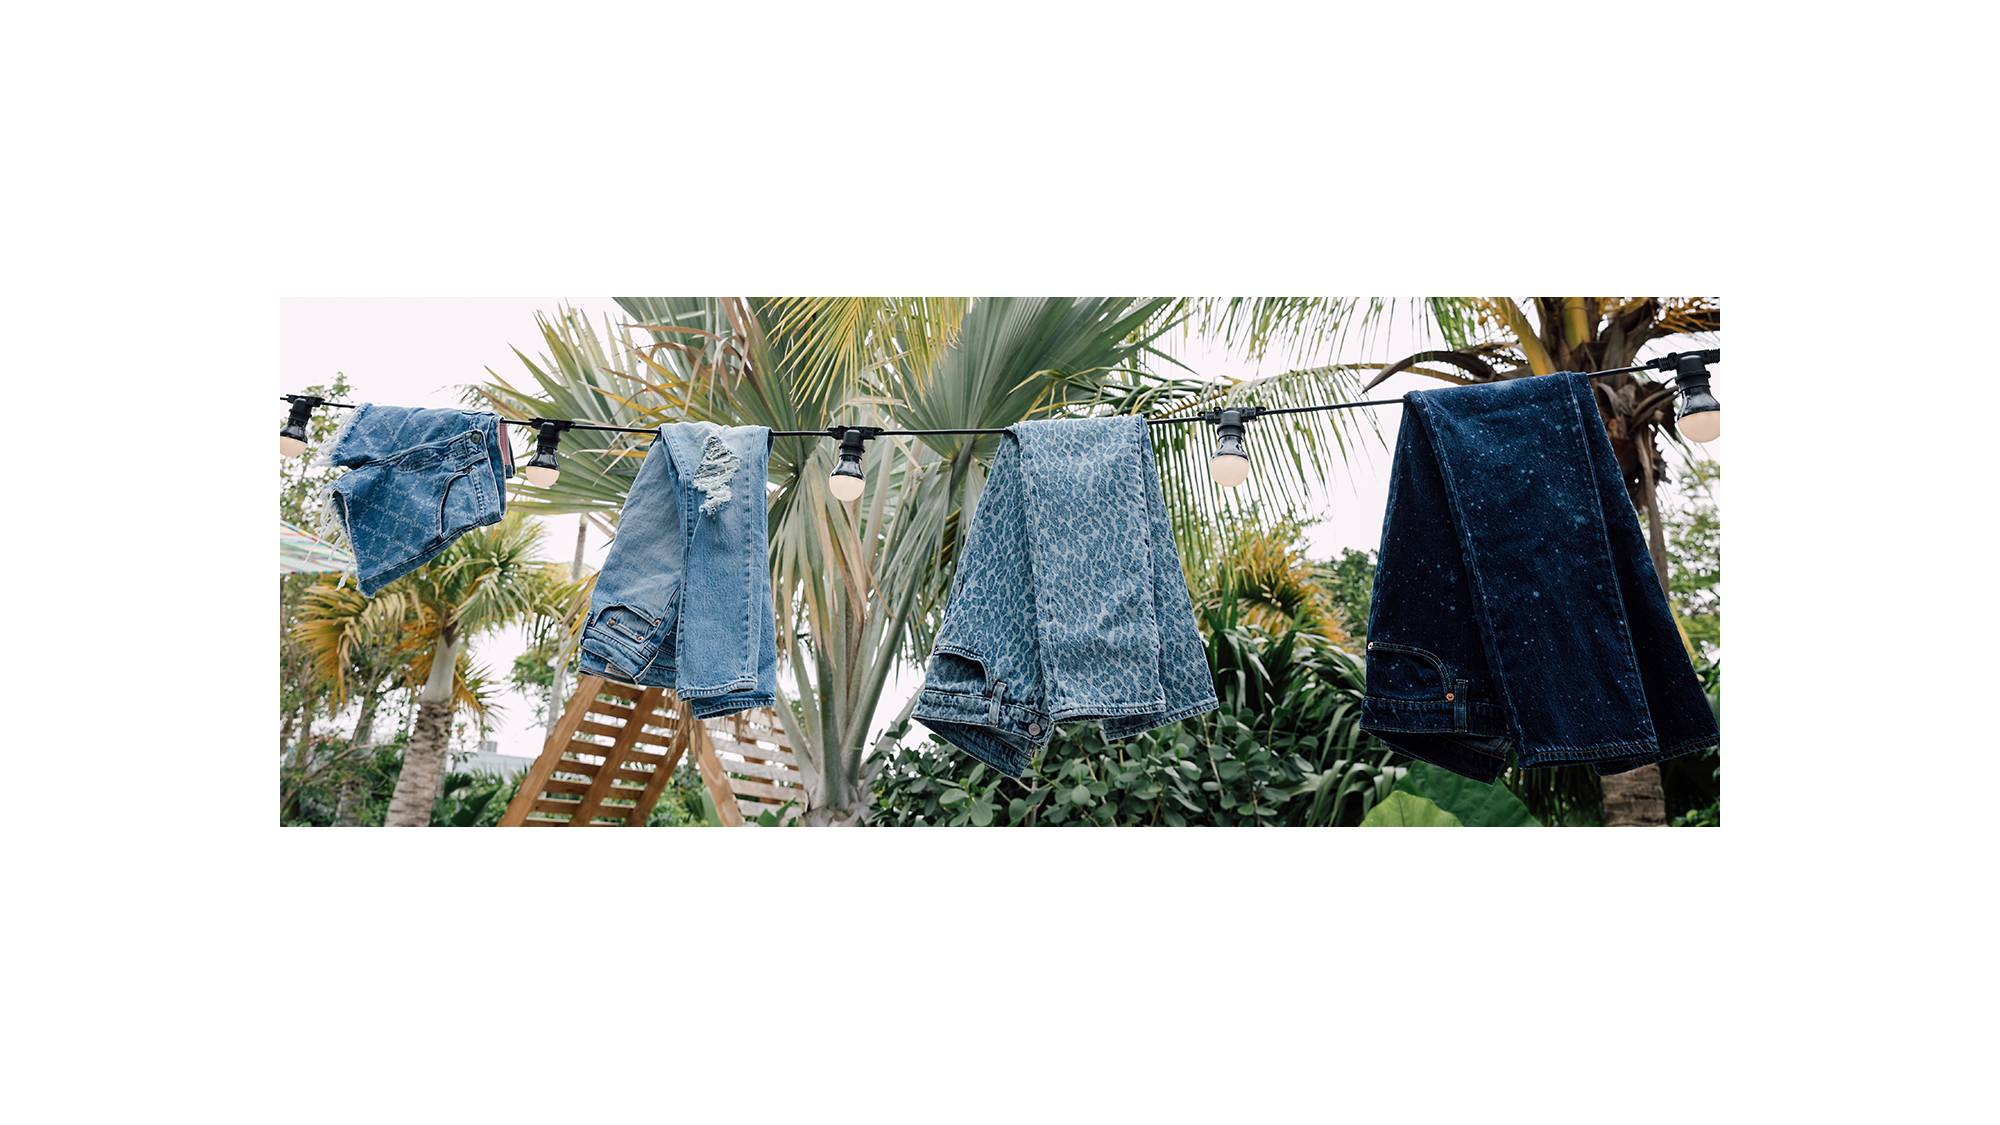 Image of four pairs of Levi's® jeans created by the Future Finish process hanging on a line of string lights with palm trees in the background.